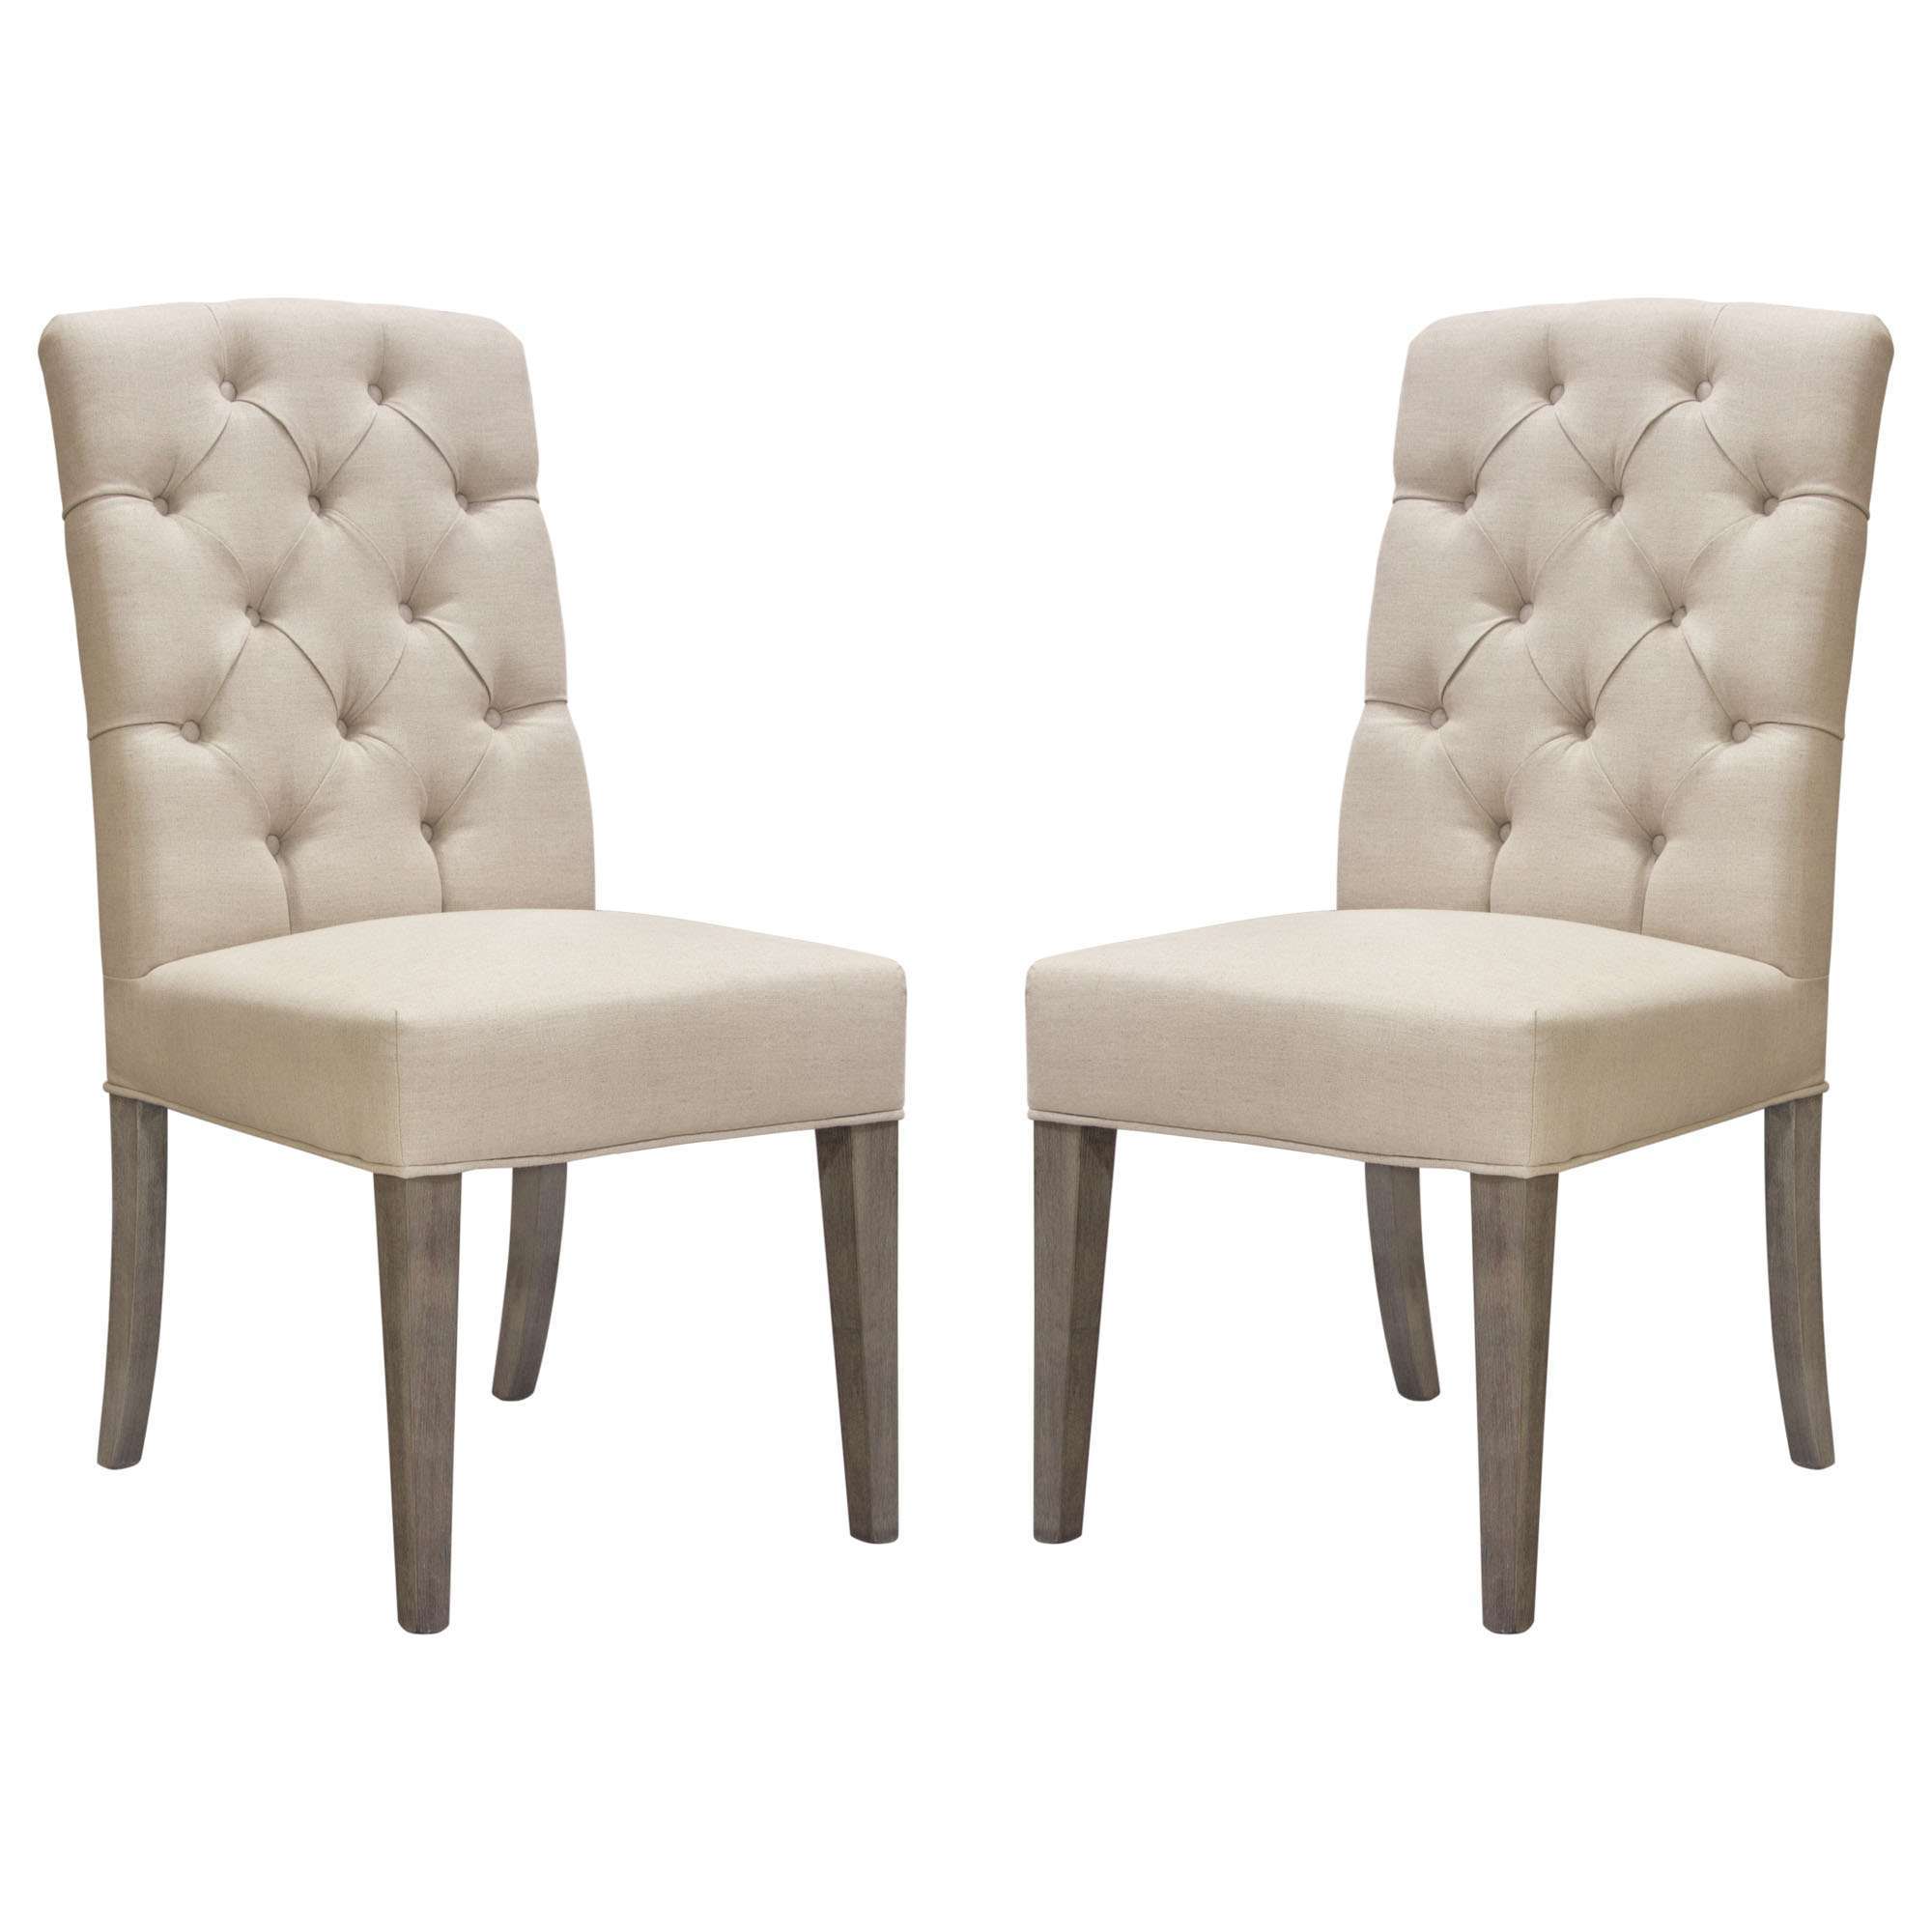 Set of Two Napa Tufted Dining Side Chairs in Sand Linen Fabric by Diamond Sofa - Decorian Group